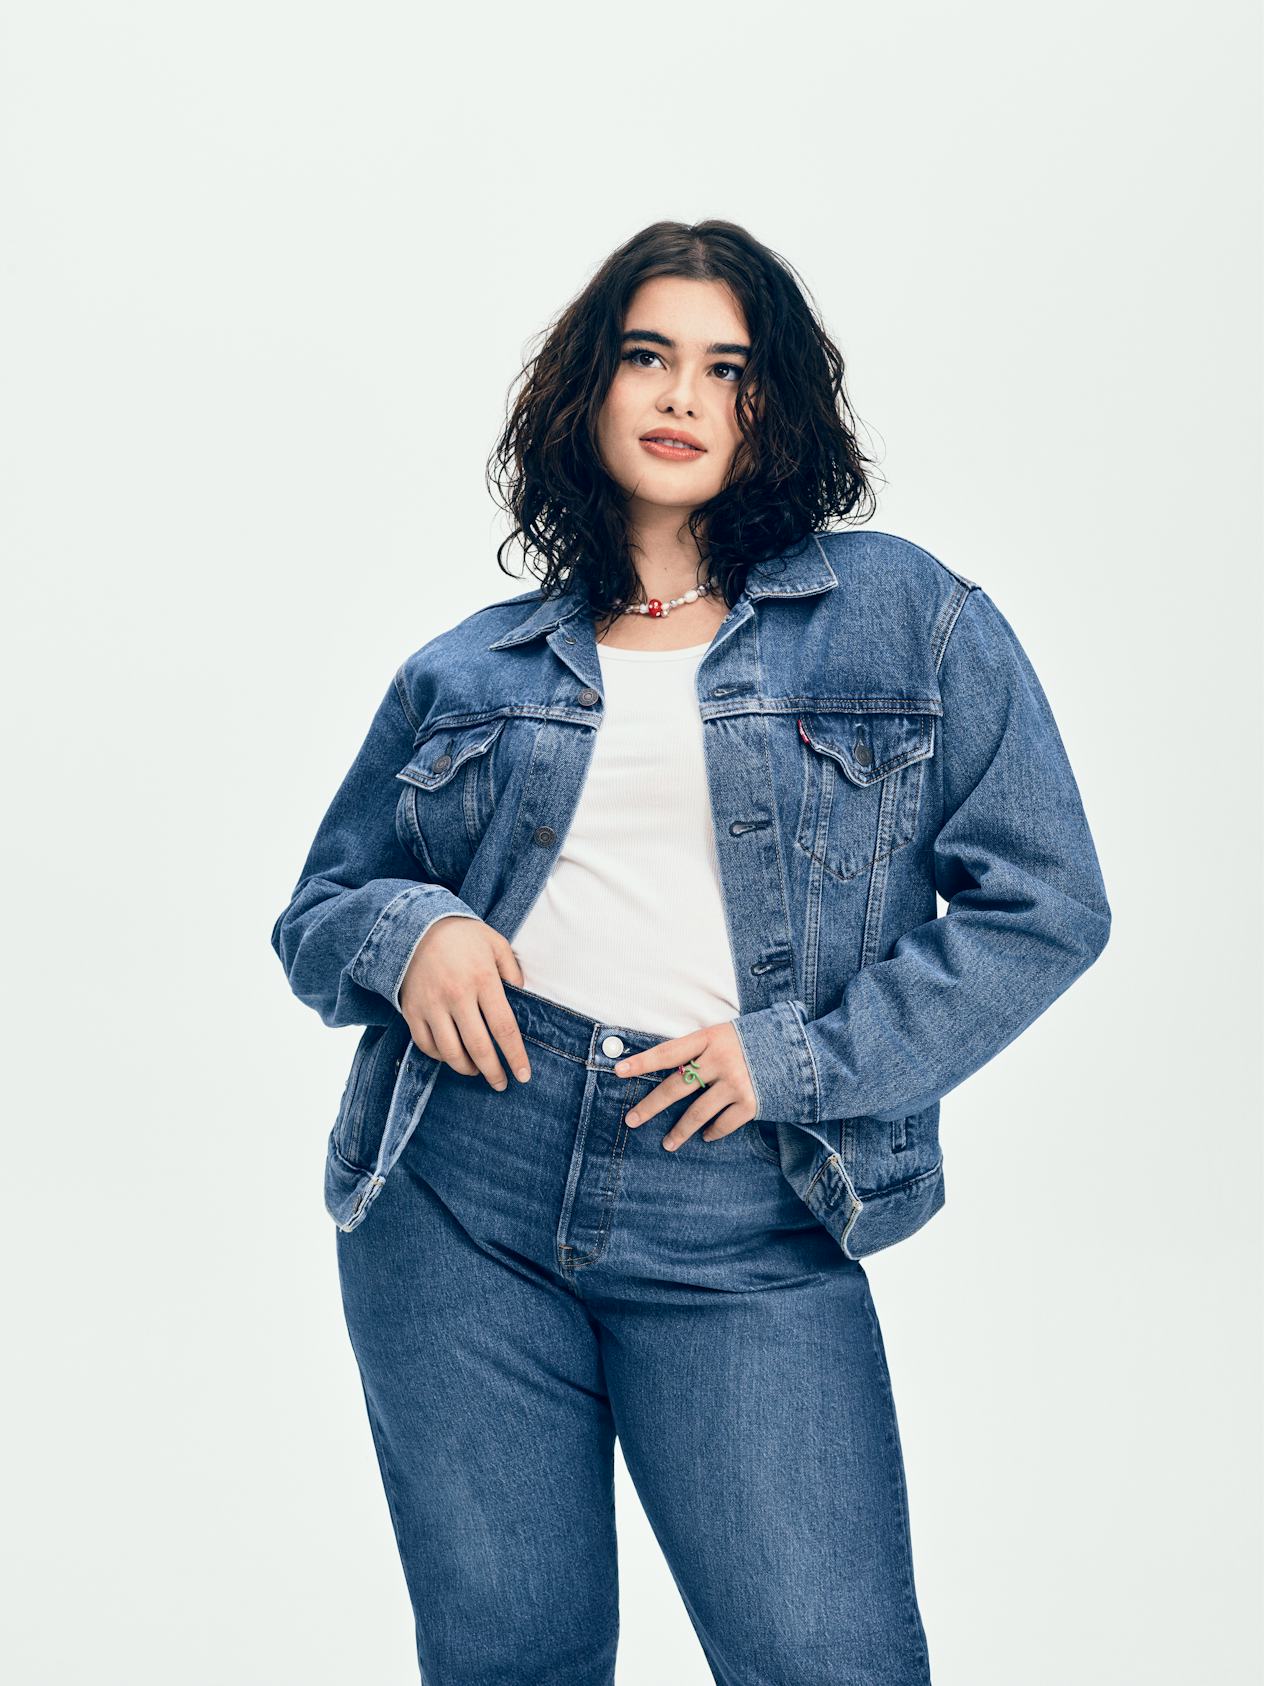 Barbie Ferreira On Her Levi's Campaign, Breakup Songs, & Her Dream ...